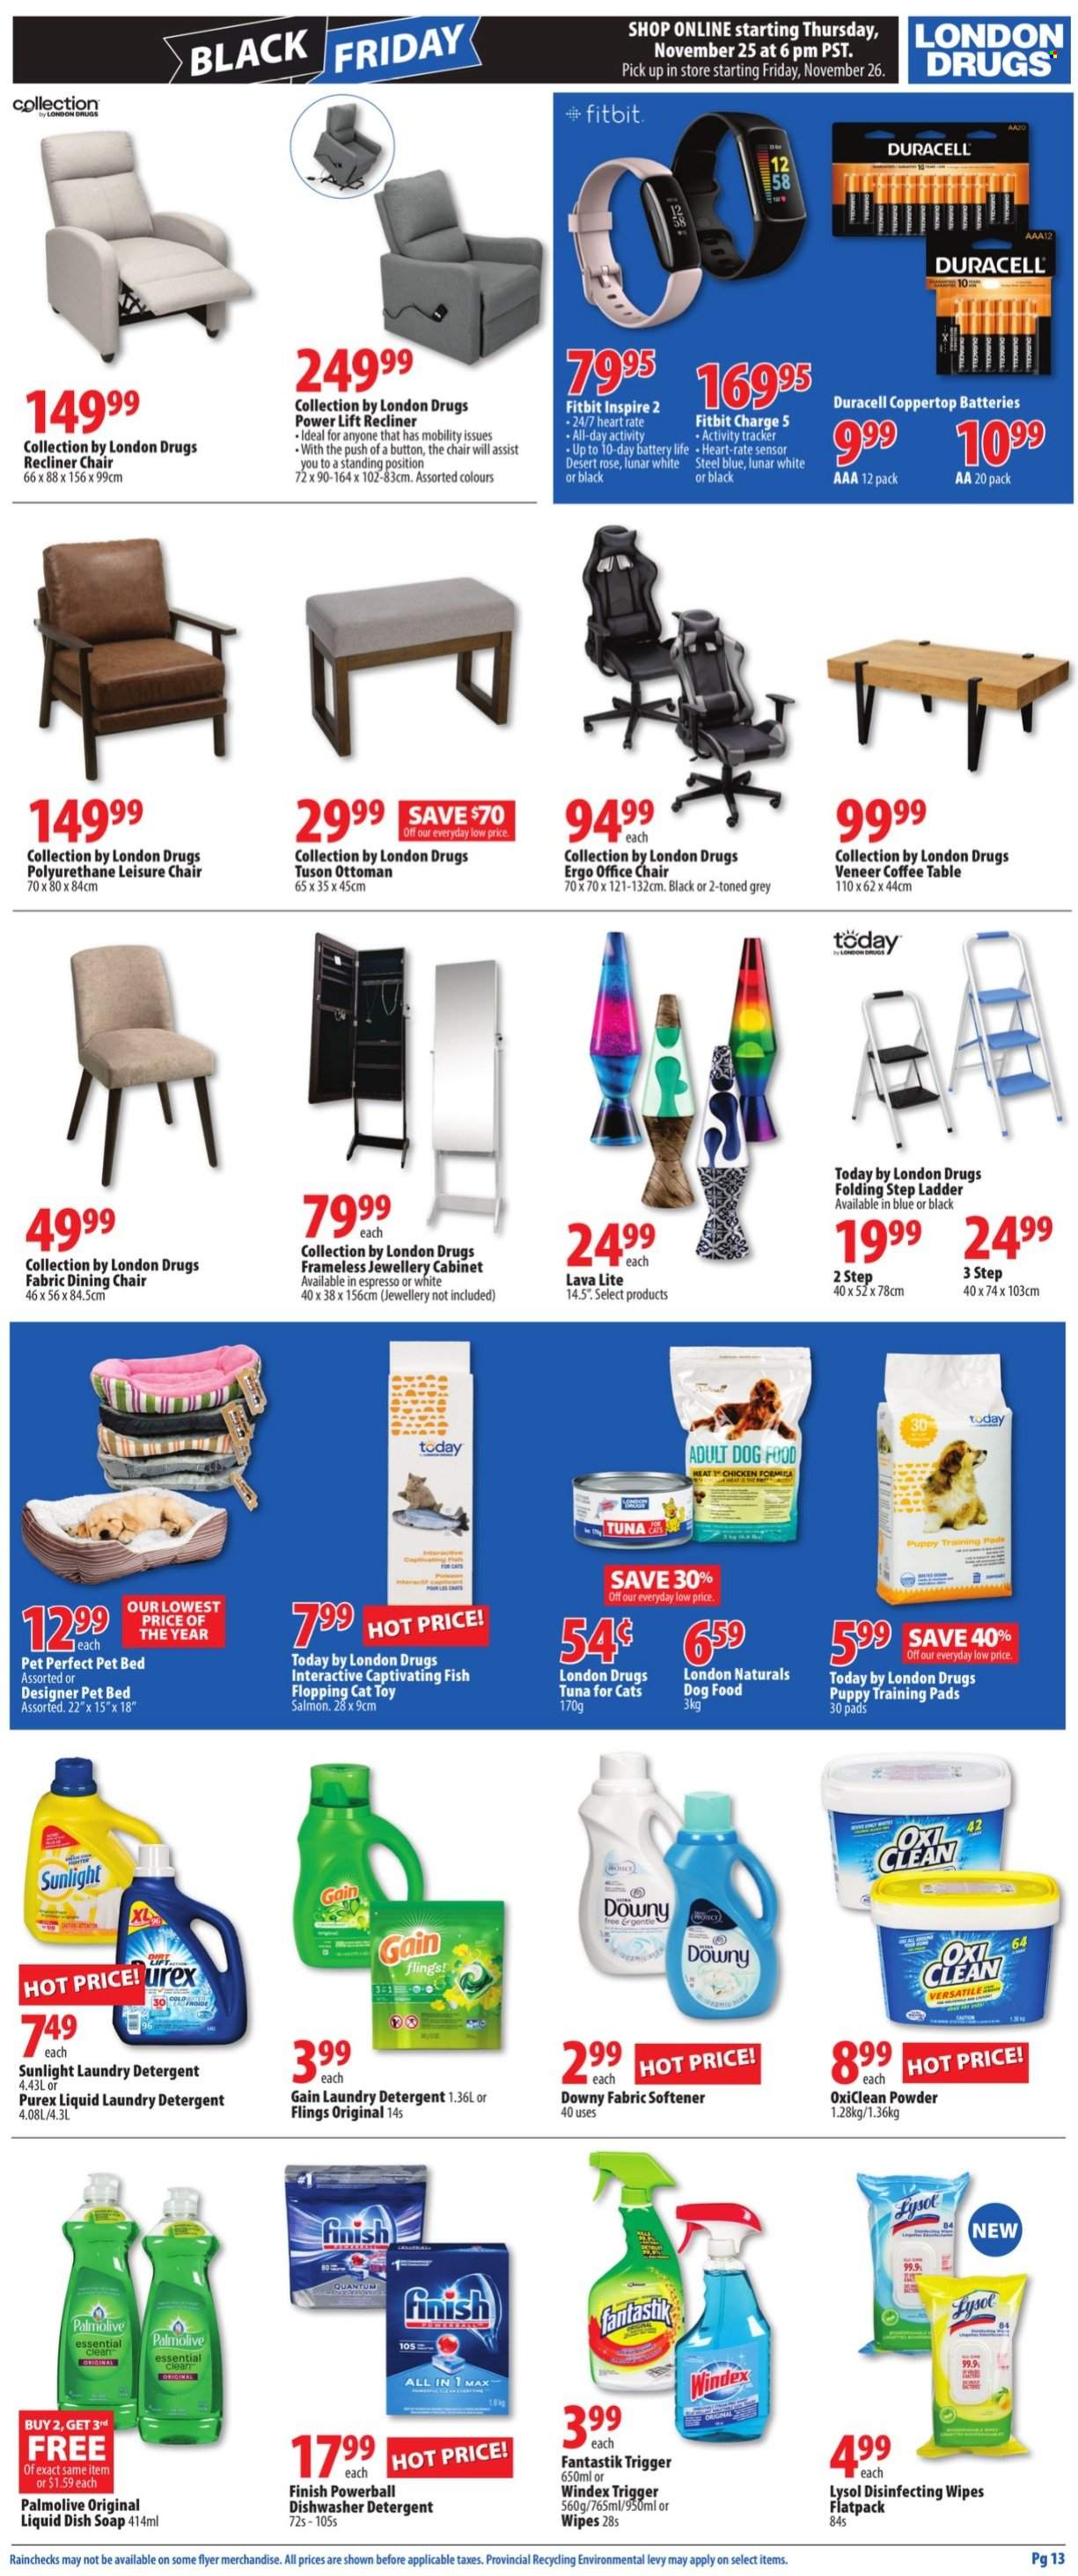 thumbnail - London Drugs Flyer - November 26, 2021 - December 01, 2021 - Sales products - rosé wine, wipes, Gain, Windex, Lysol, OxiClean, fabric softener, laundry detergent, Sunlight, Purex, Downy Laundry, Finish Powerball, Palmolive, soap, Duracell, chair pad, activity tracker, Fitbit, cabinet, table, chair, dining chair, recliner chair, coffee table, ottoman, office chair, toys, rose, detergent. Page 15.